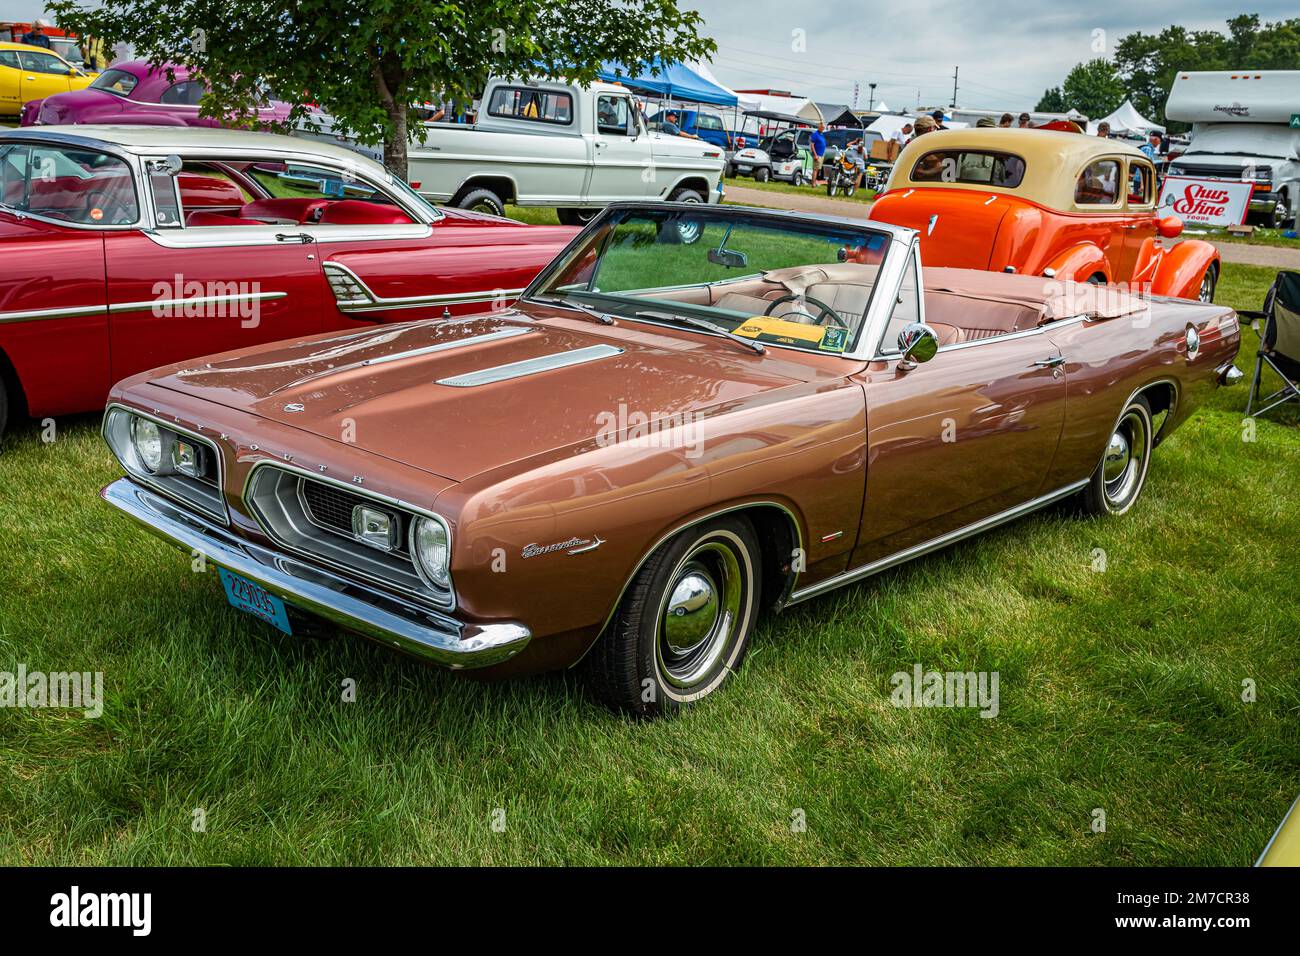 Iola, WI - July 07, 2022: High perspective front corner view of a 1967 Plymouth Barracuda Convertible at a local car show. Stock Photo